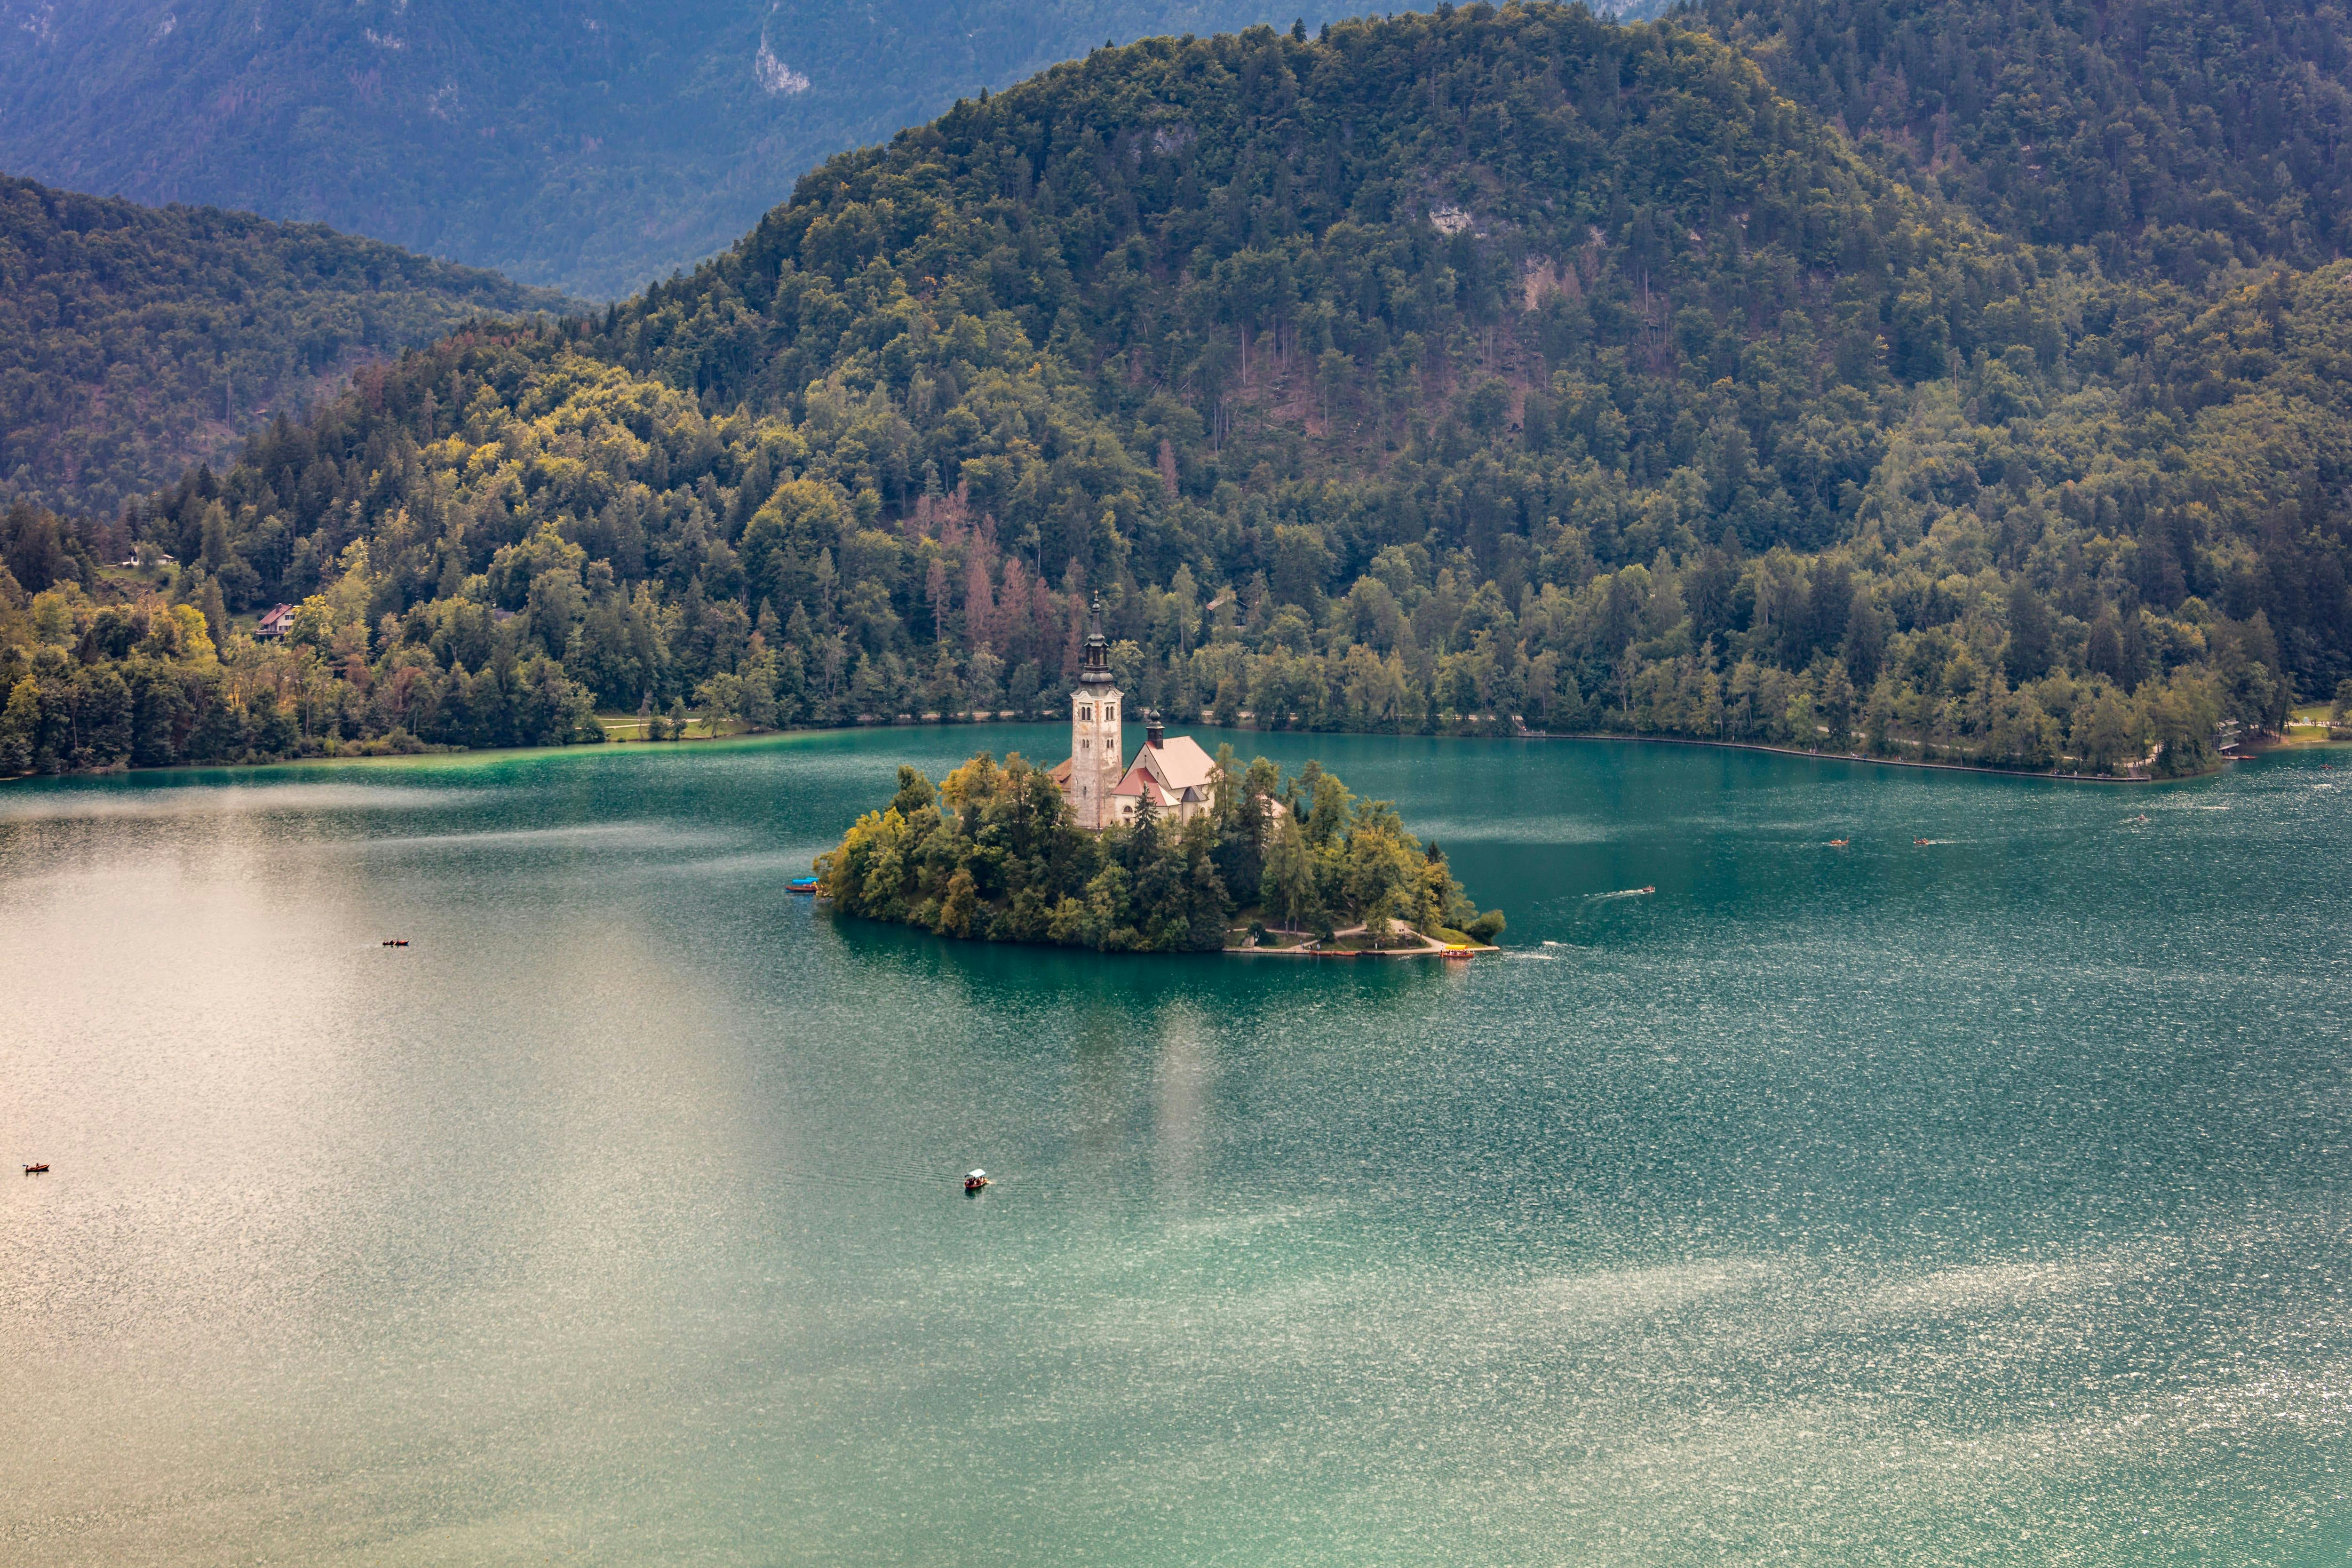 Summer Tour of Lake Bled with Bled Castle and Boat Ride